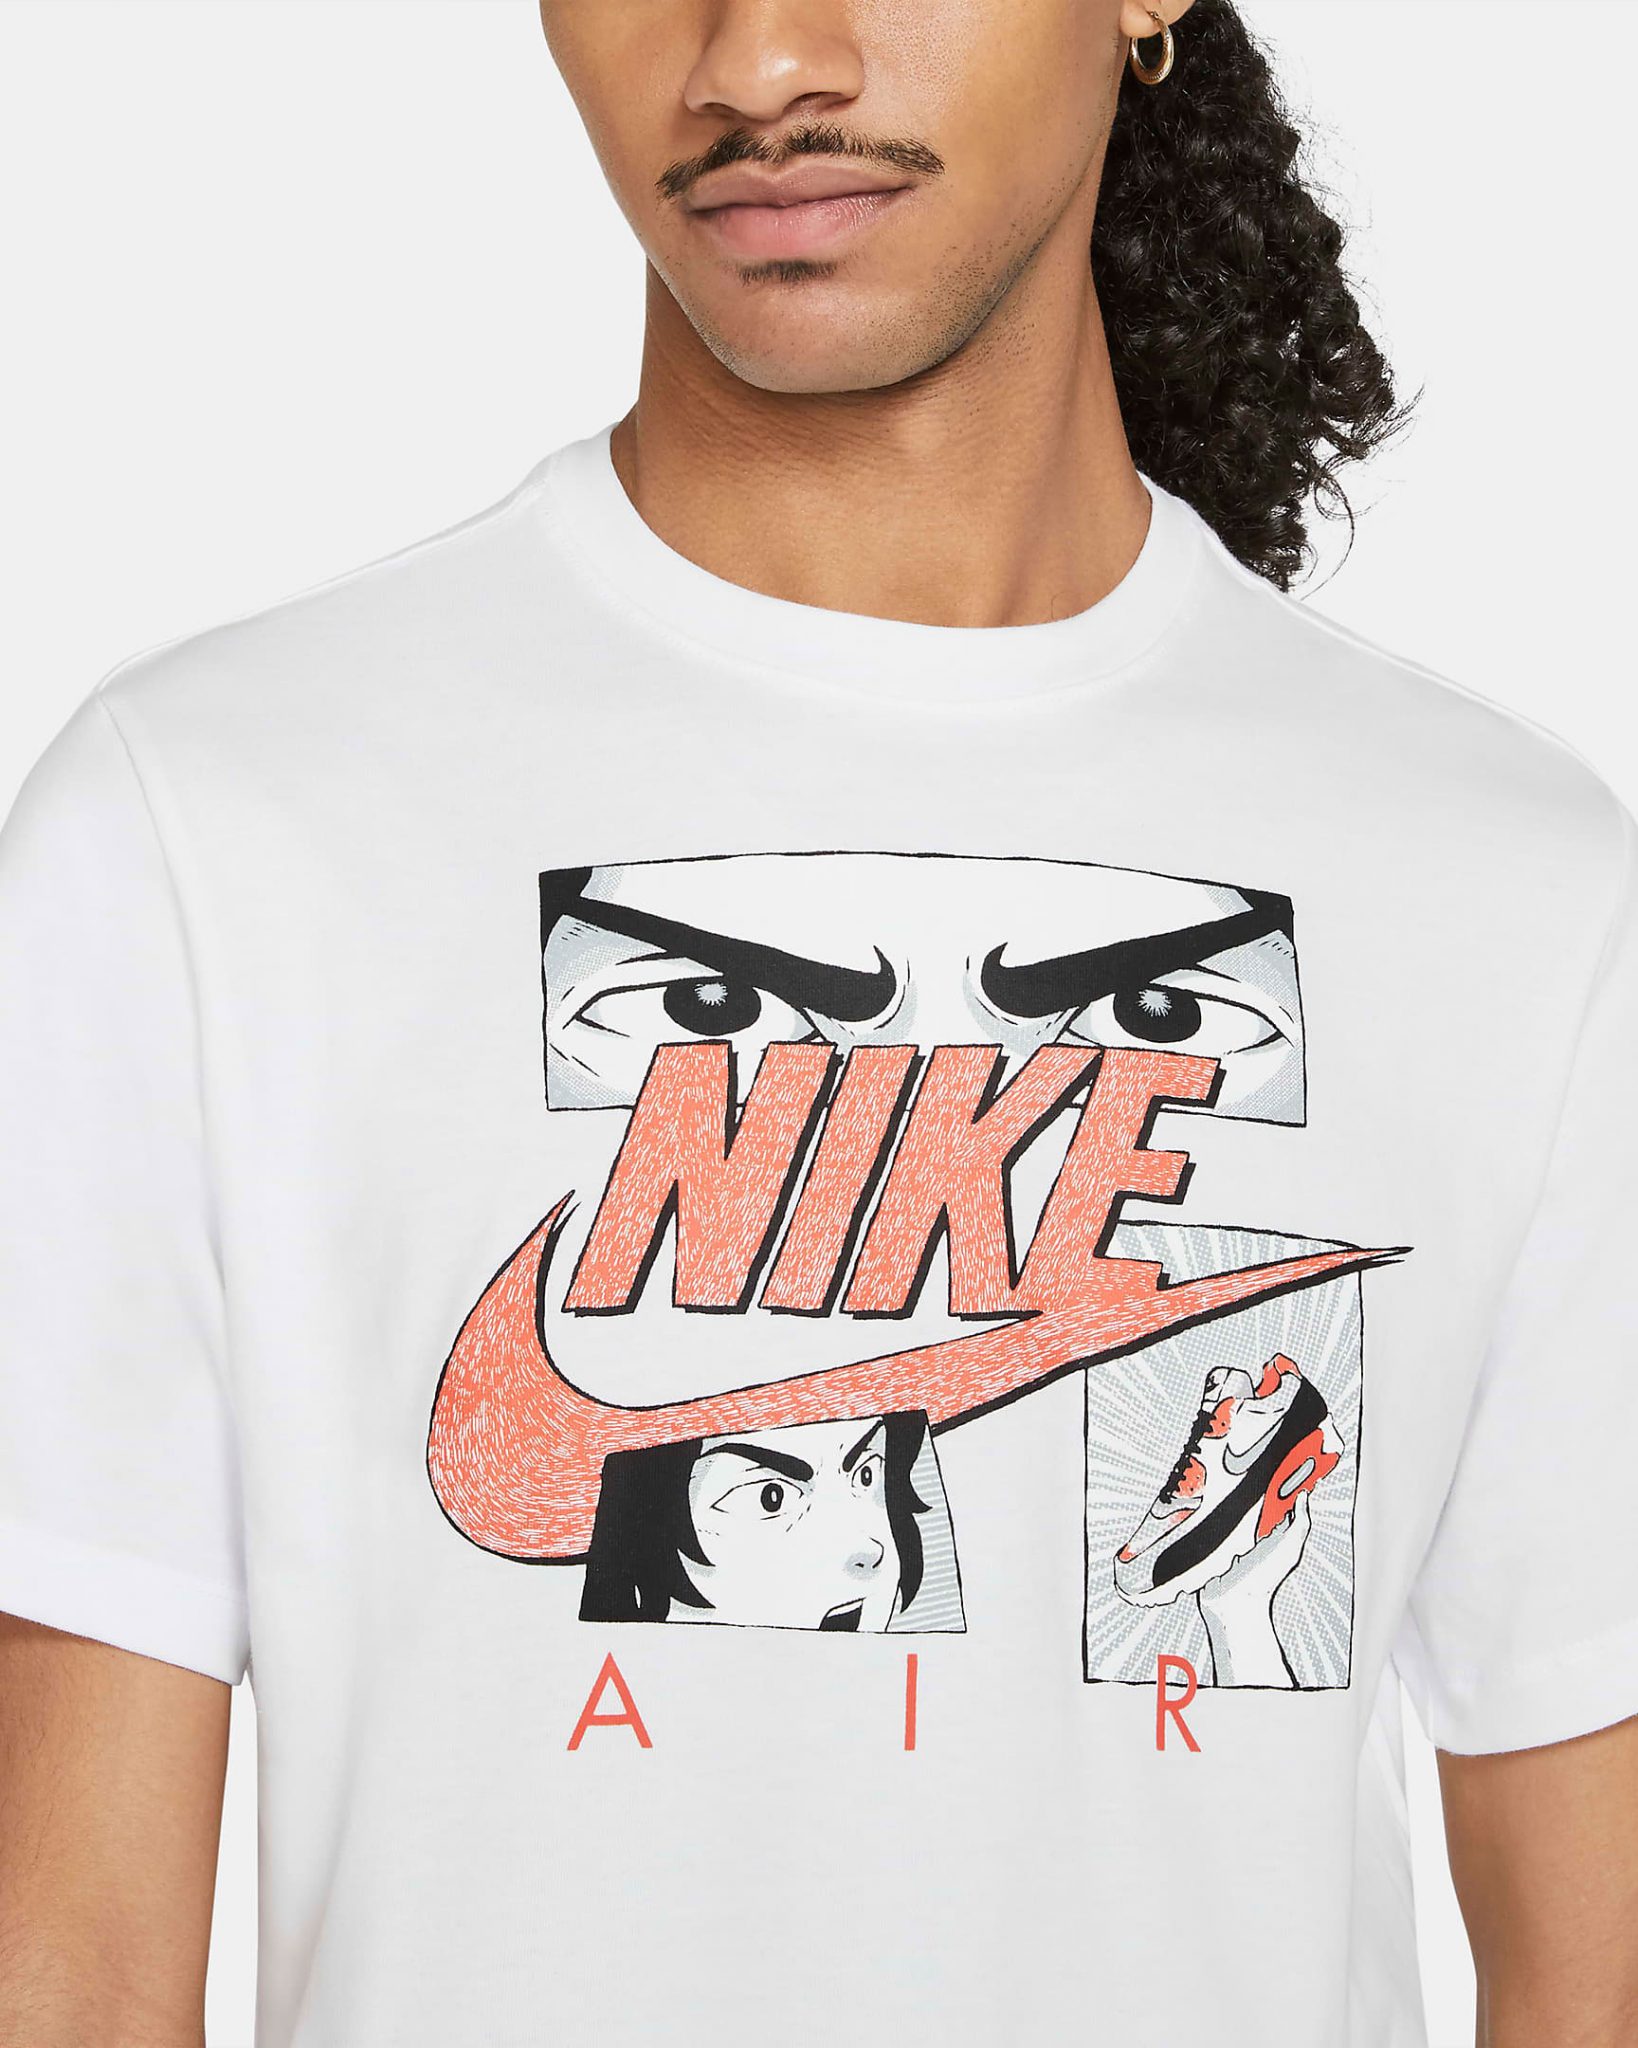 Nike Air Max 90 Infrared Radiant Red Shirt | SneakerFits.com